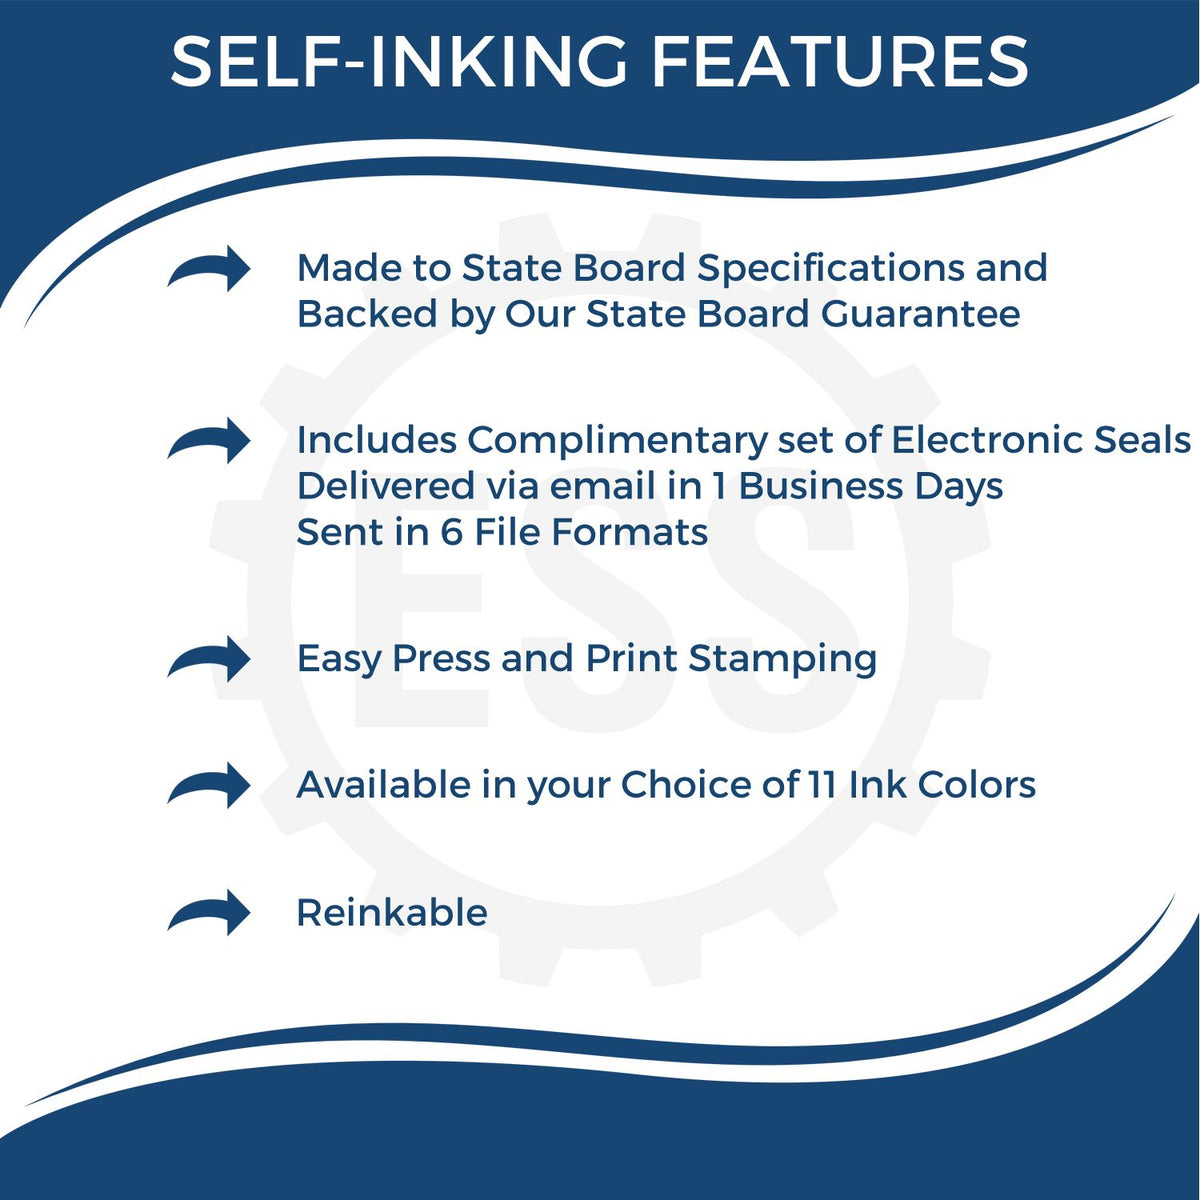 A picture of an infographic highlighting the selling points for the Self-Inking New Hampshire Landscape Architect Stamp